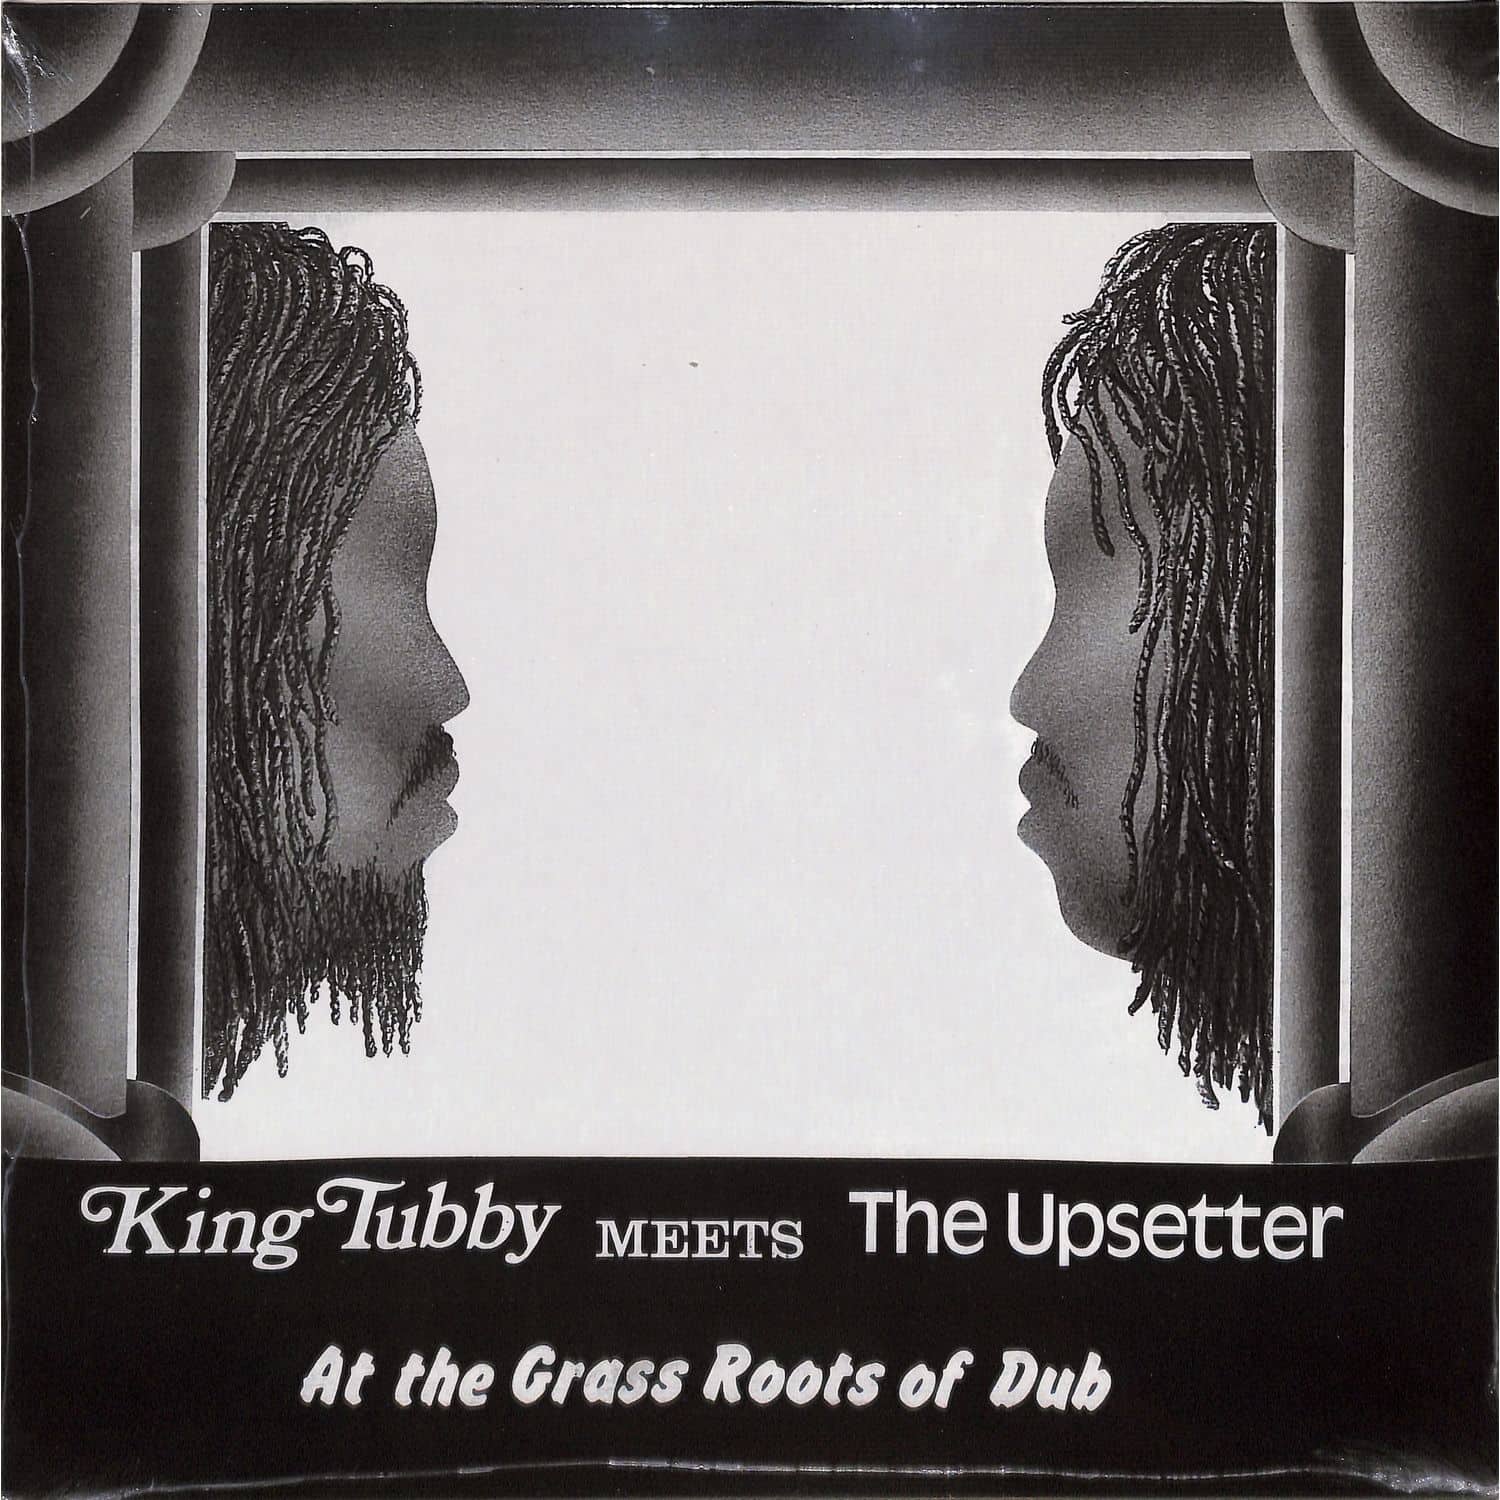 King Tubby meets The Upsetter - AT THE GRASS ROOTS OF DUB 